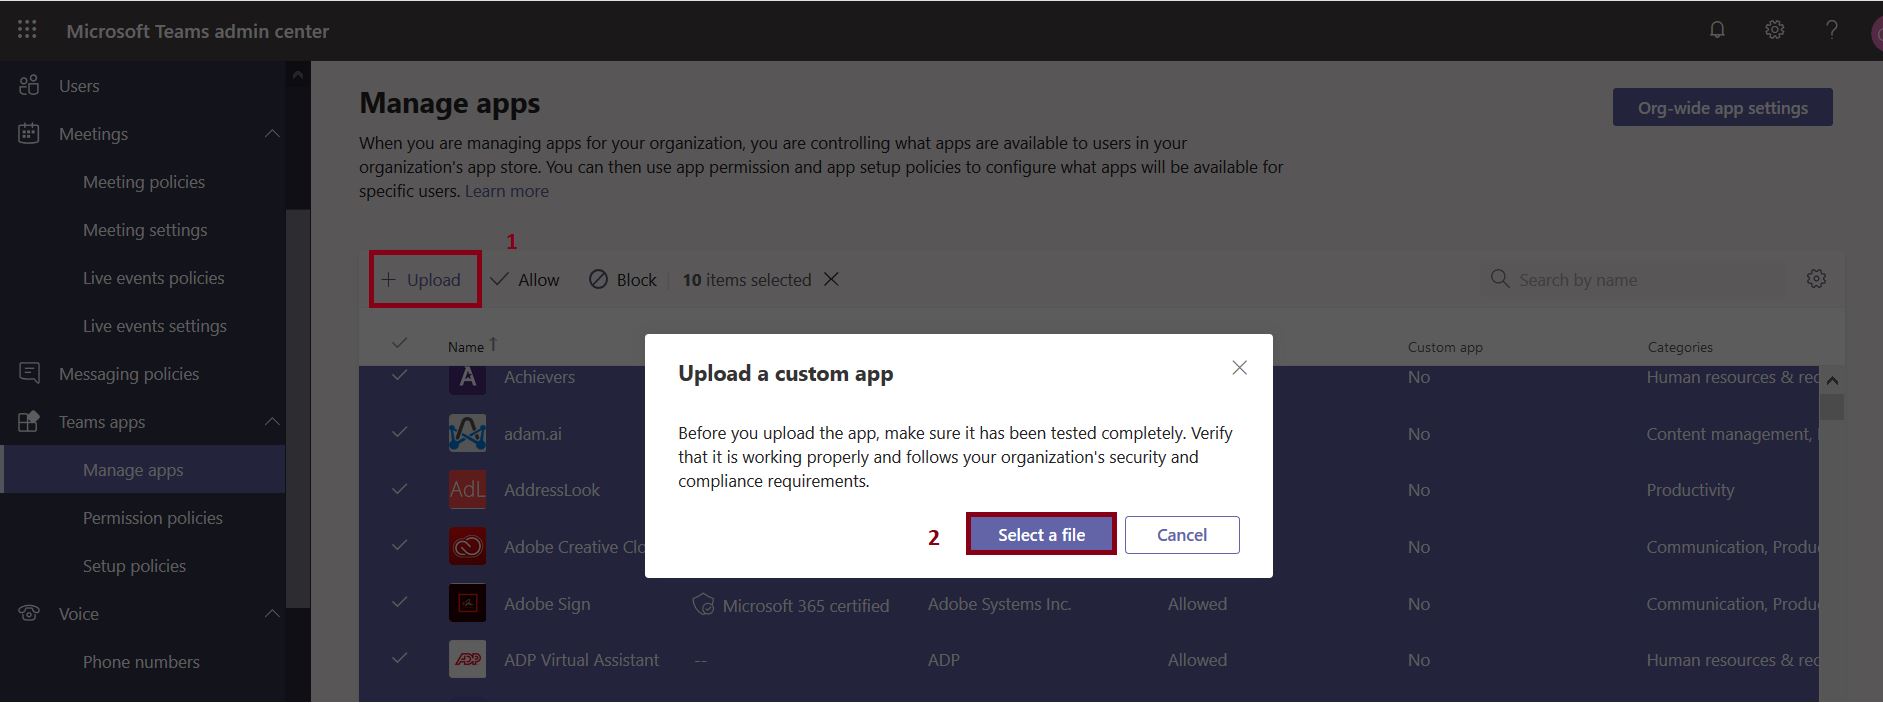 Manage apps in Microsoft Teams, upload a custom app in Microsoft Teams app catalog store